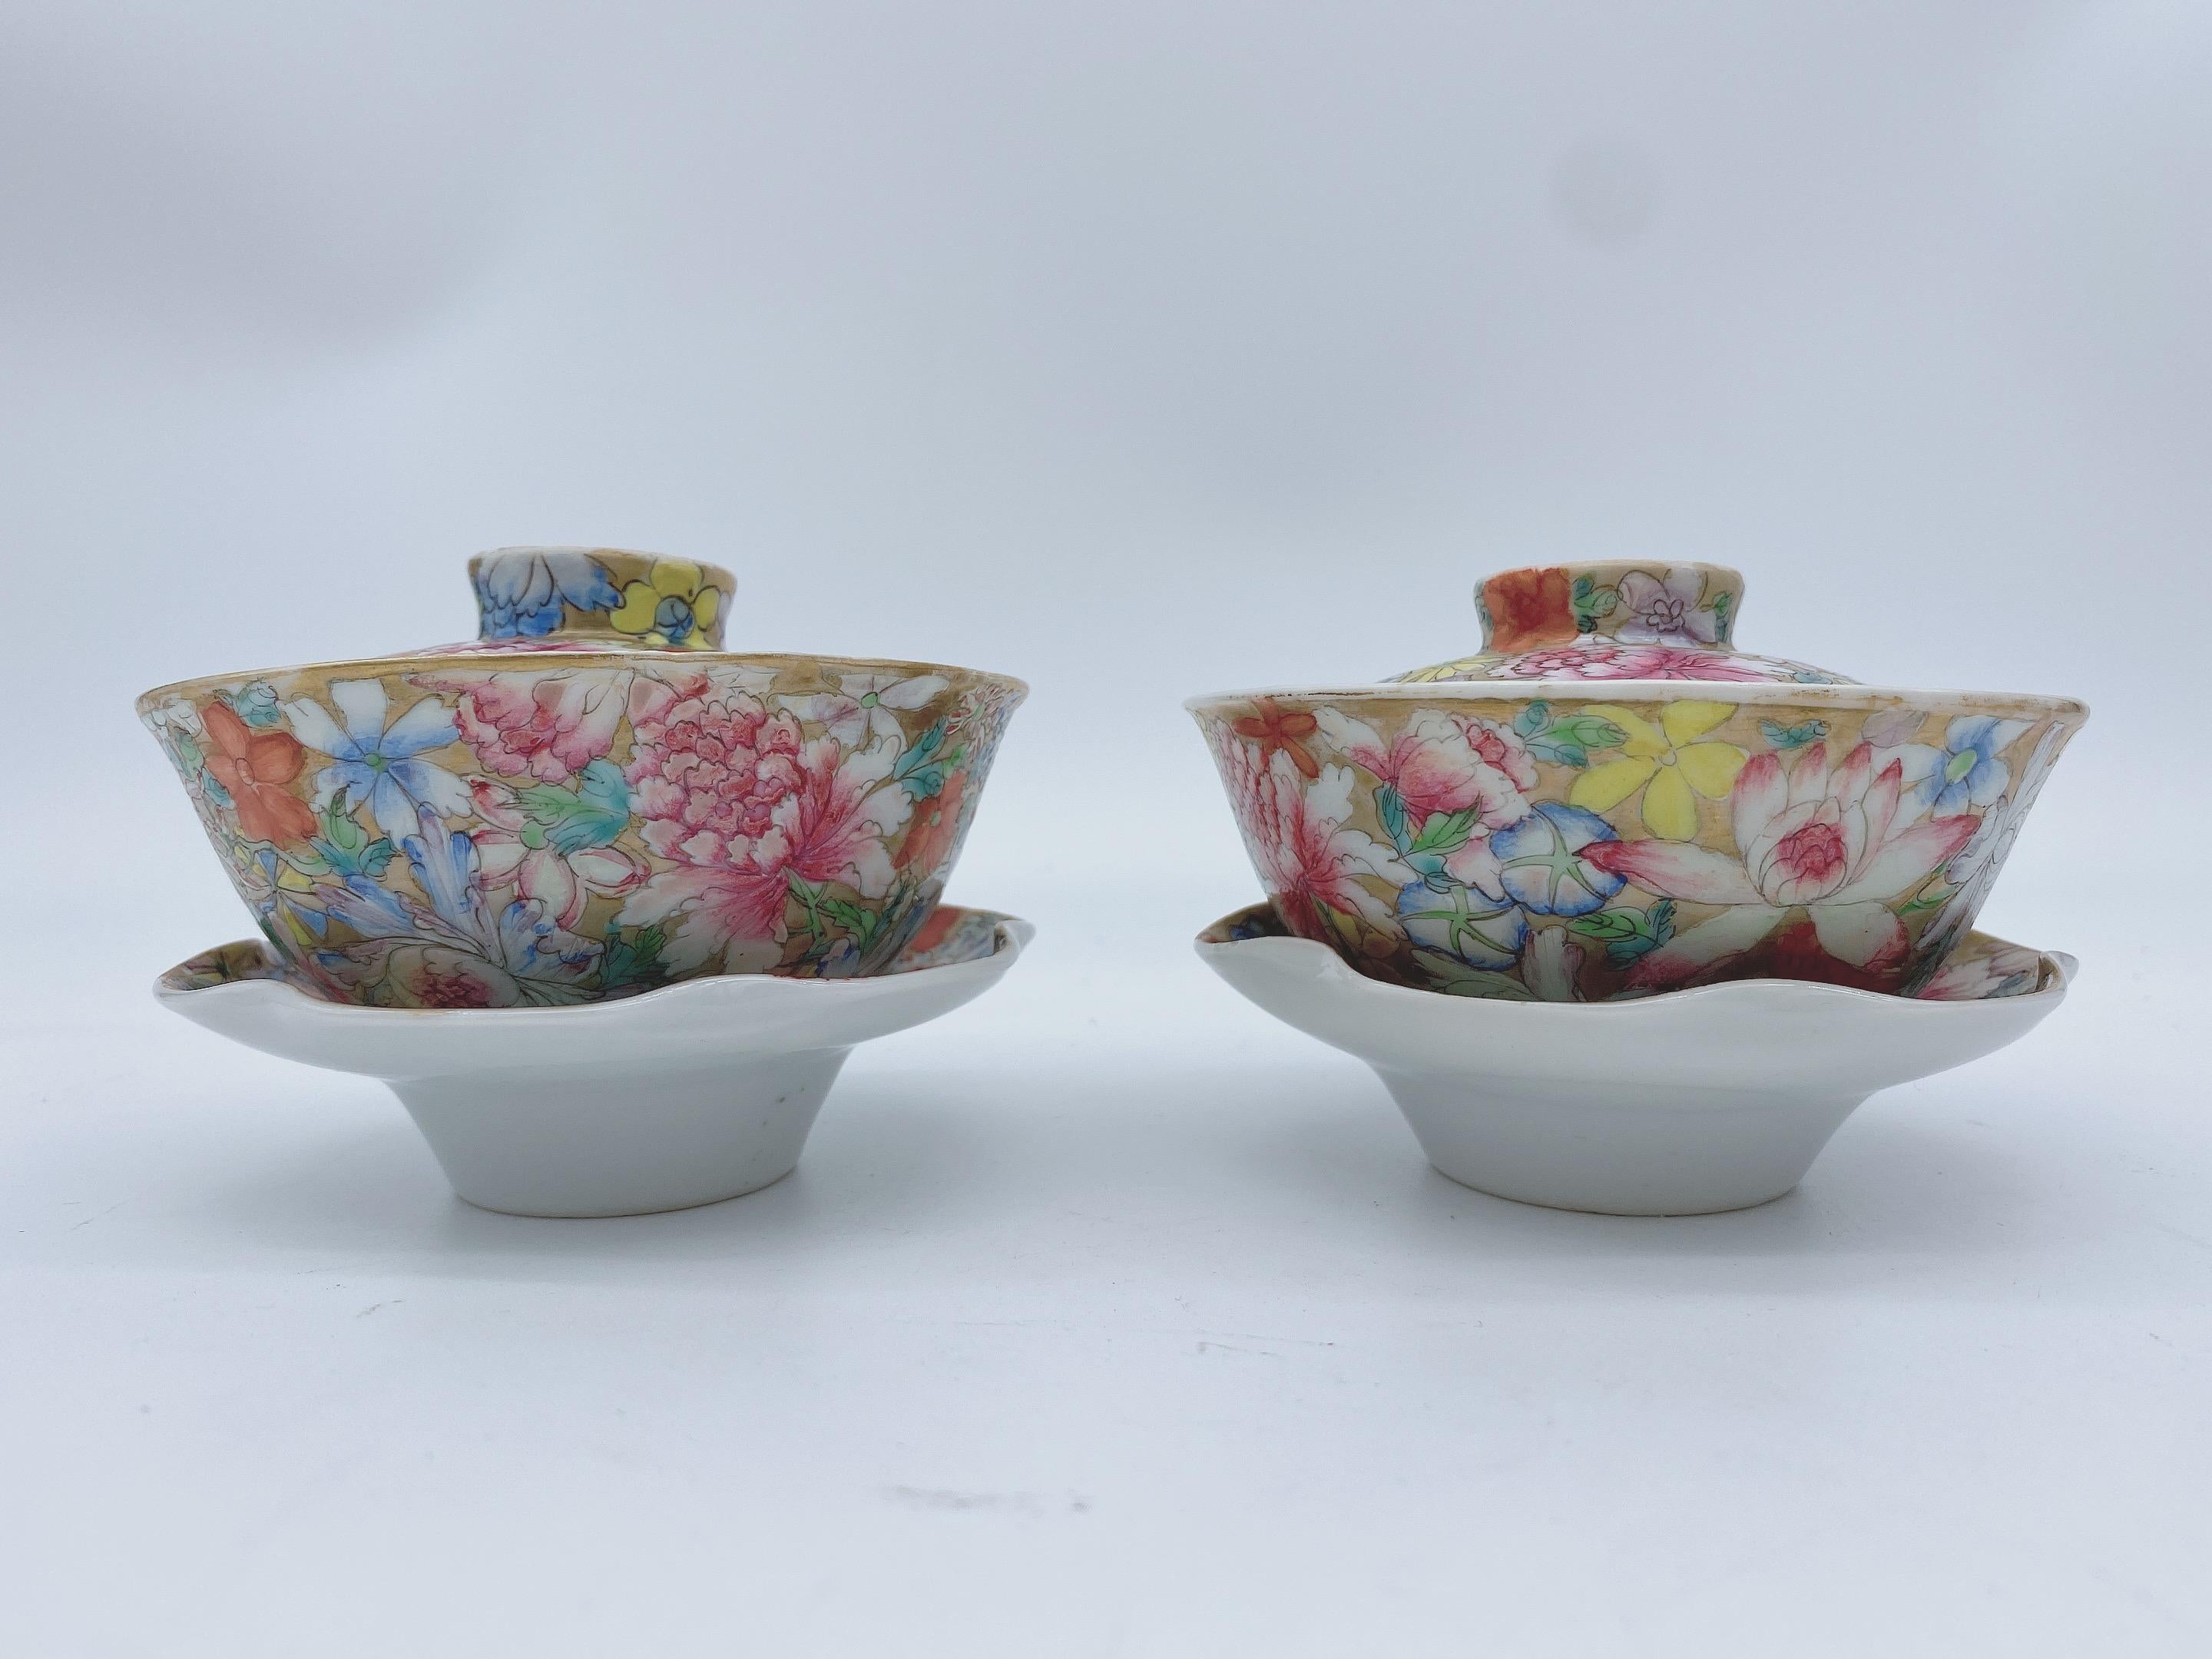 Qing Pair of 19th Century Chinese Flower-Blossom Porcelain Cups with Cover and Base For Sale